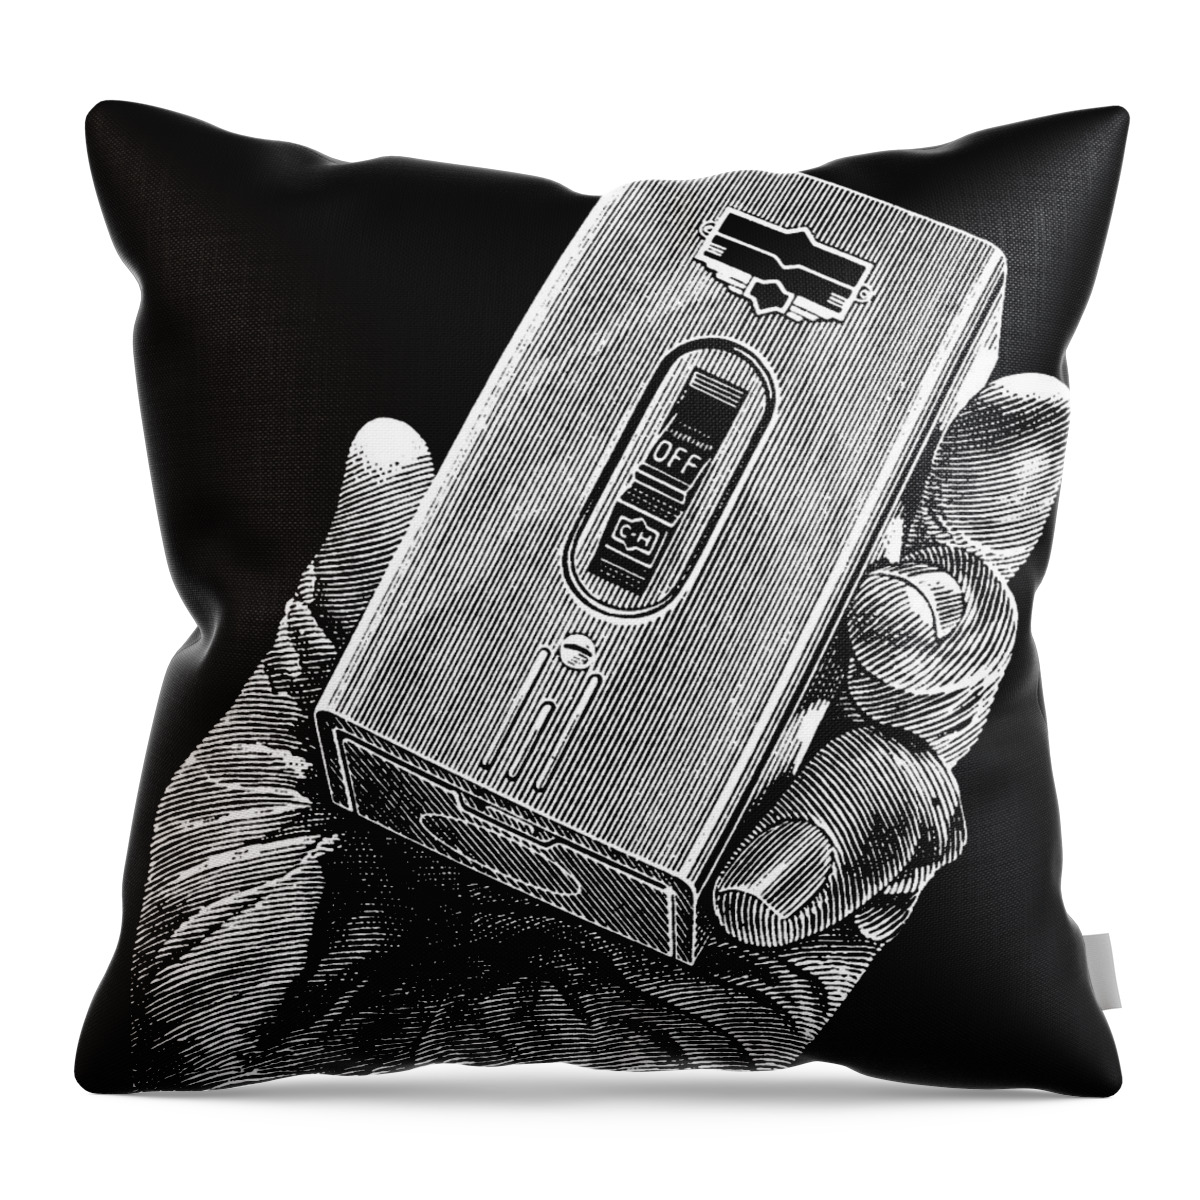 Black And White Throw Pillow featuring the drawing Hand Holding On/Off Switch by CSA Images